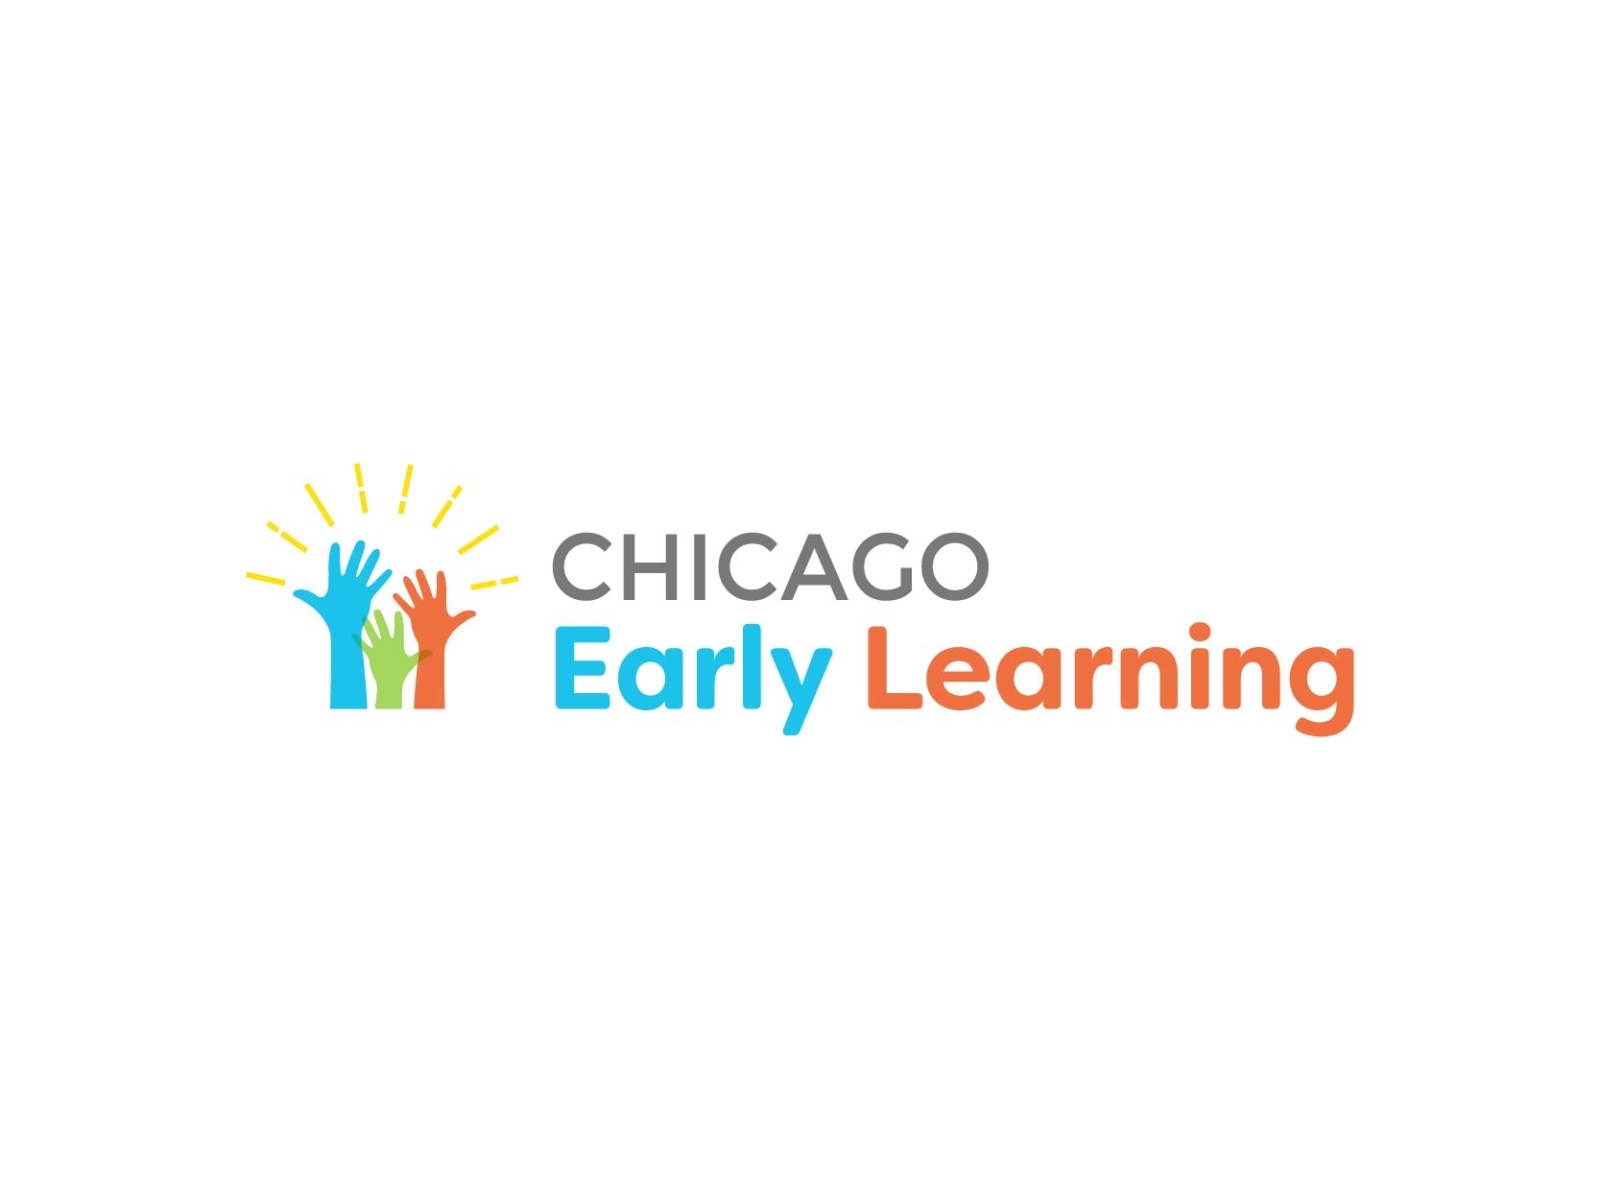 Chicago Early Learning Logo By Camilo Vera On Dribbble 2474